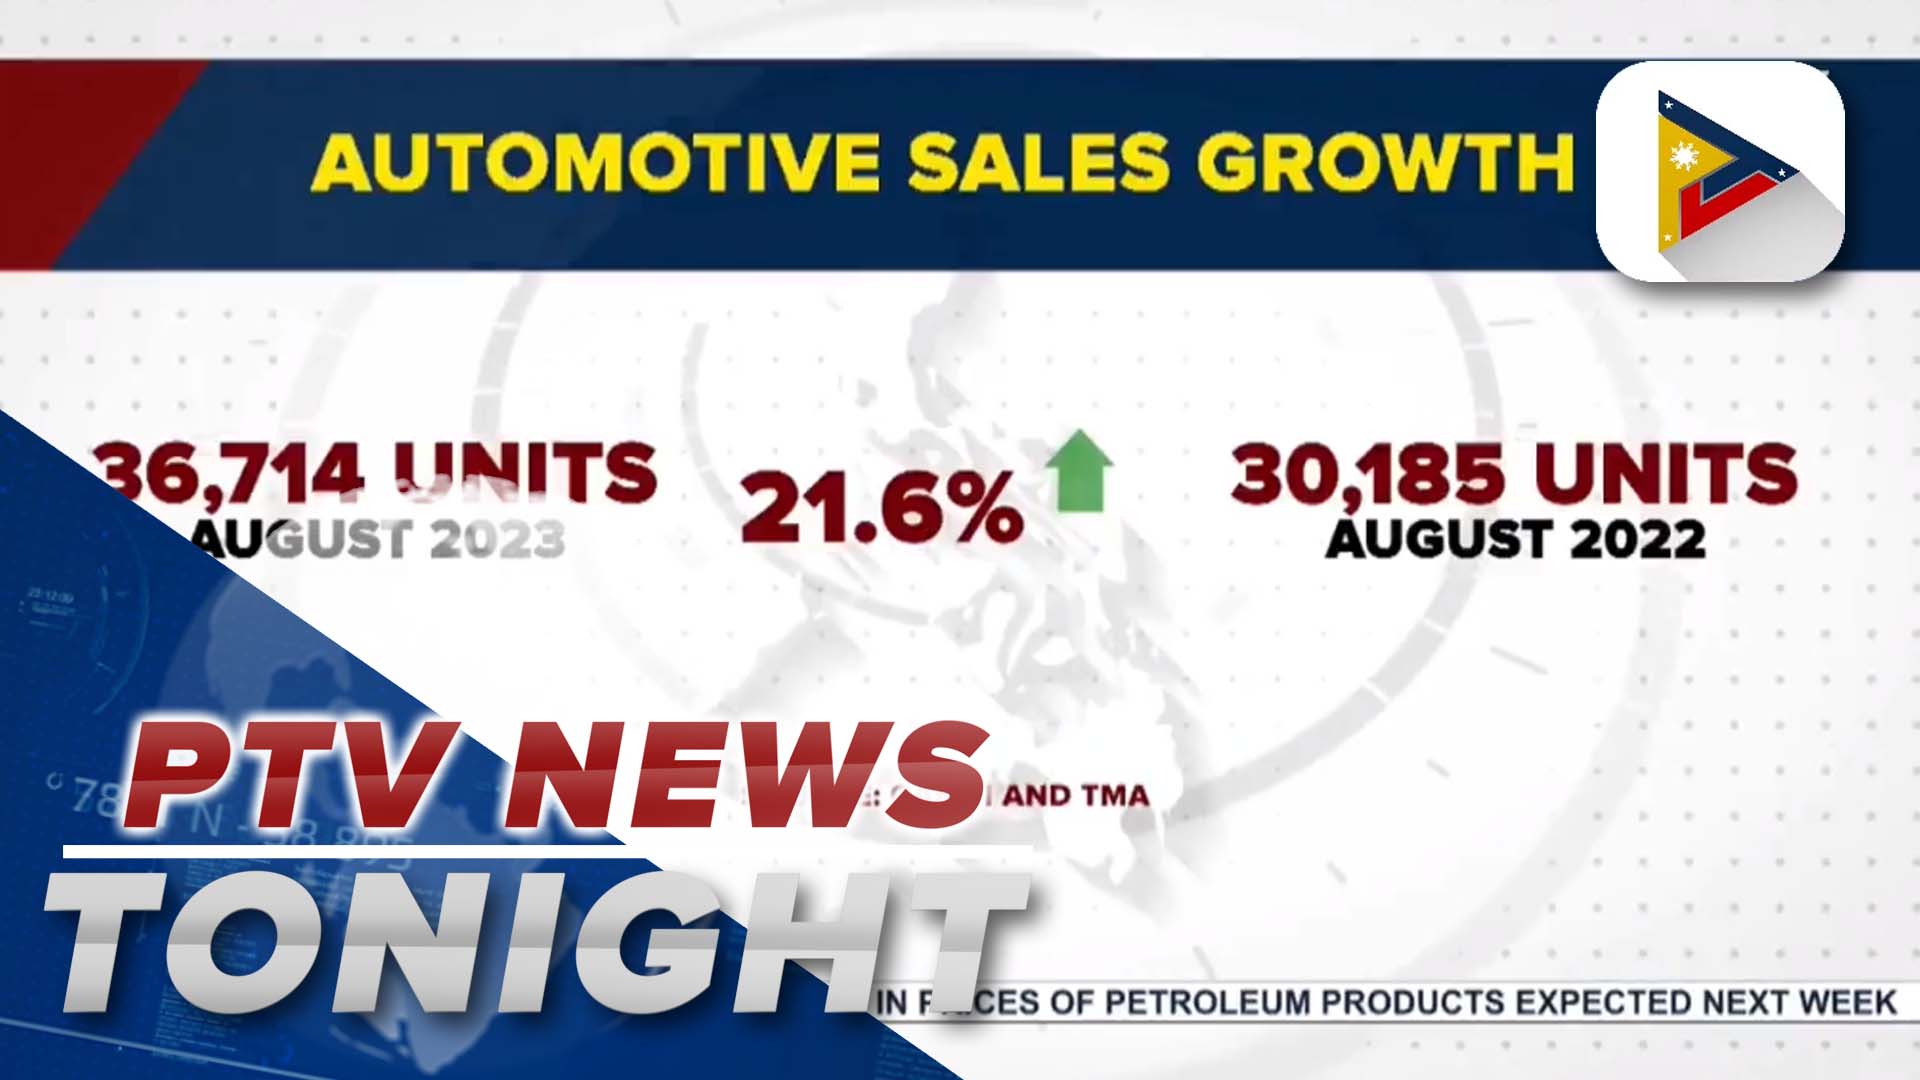 PH automotive sales growth up by 21.6% in August